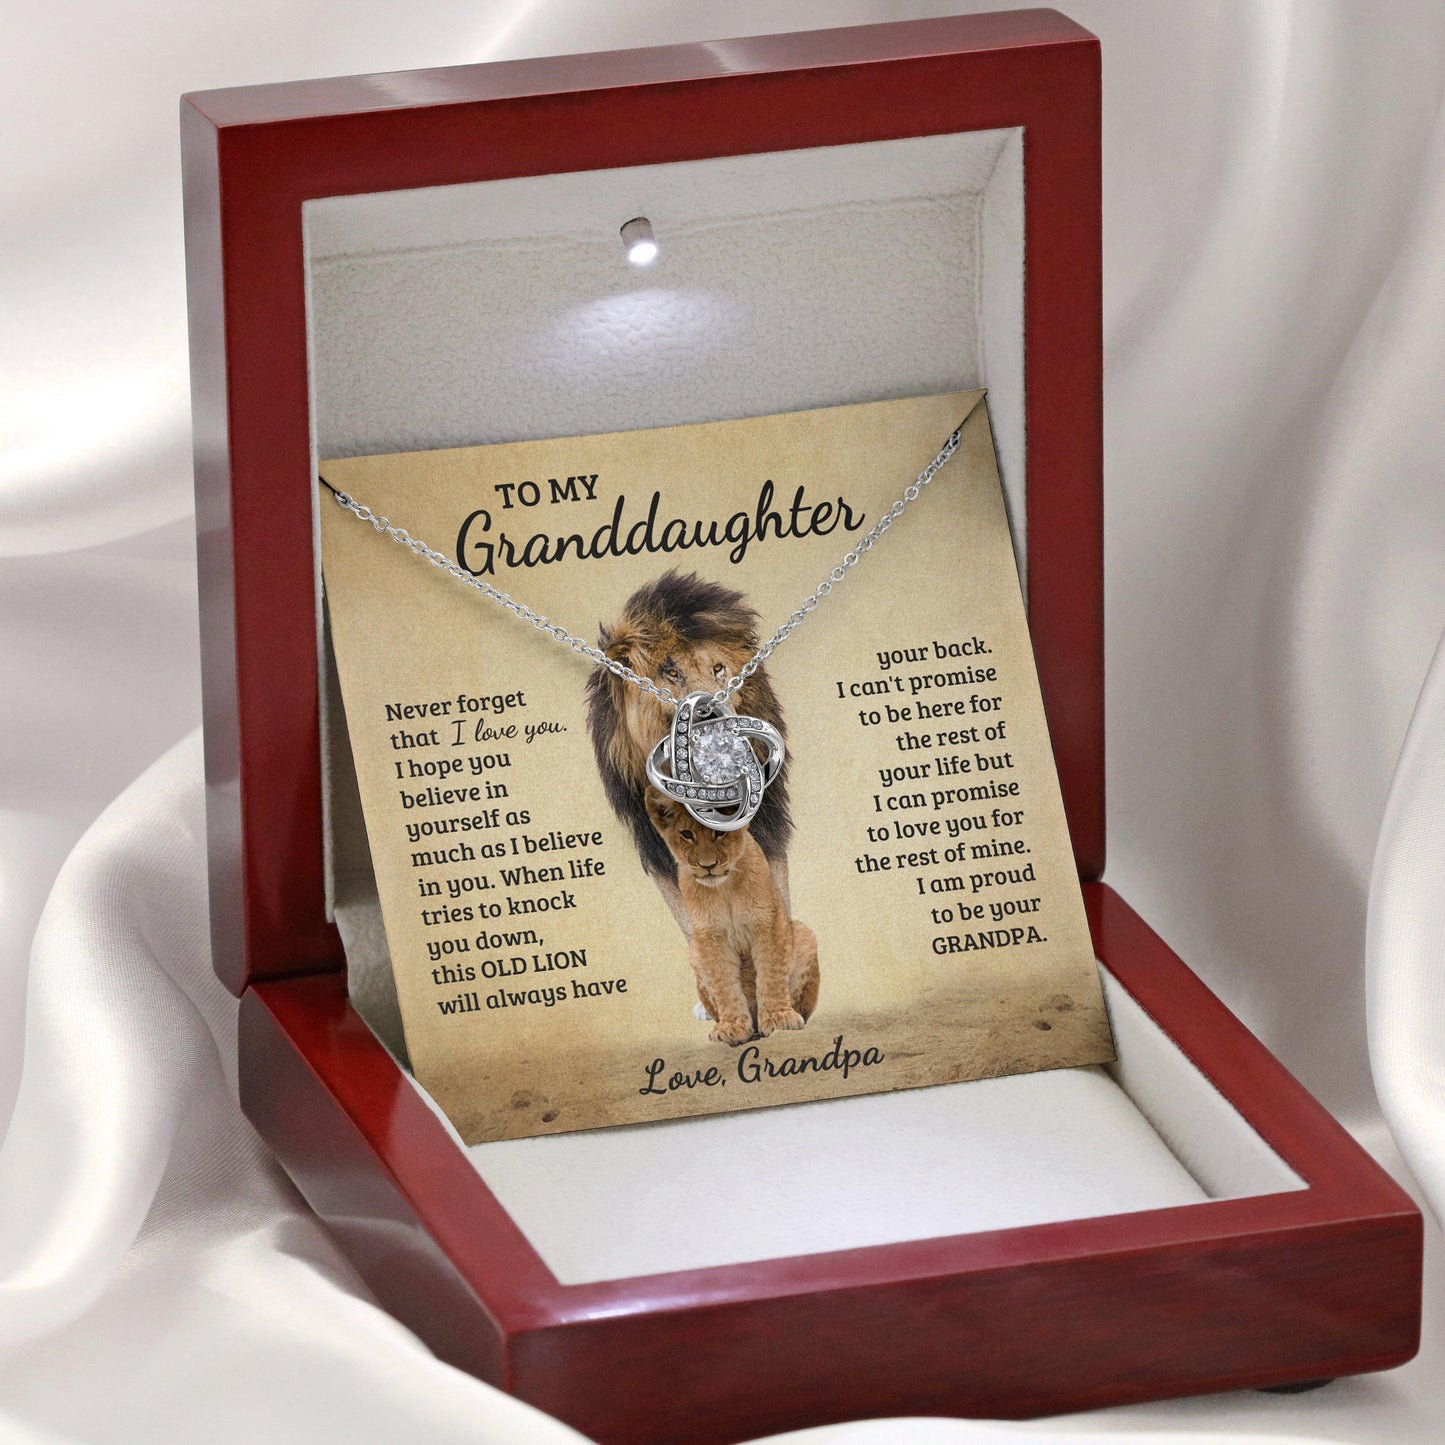 Jewelry gifts Granddaughter - Proud of you  - Necklace - Belesmé - Memorable Jewelry Gifts